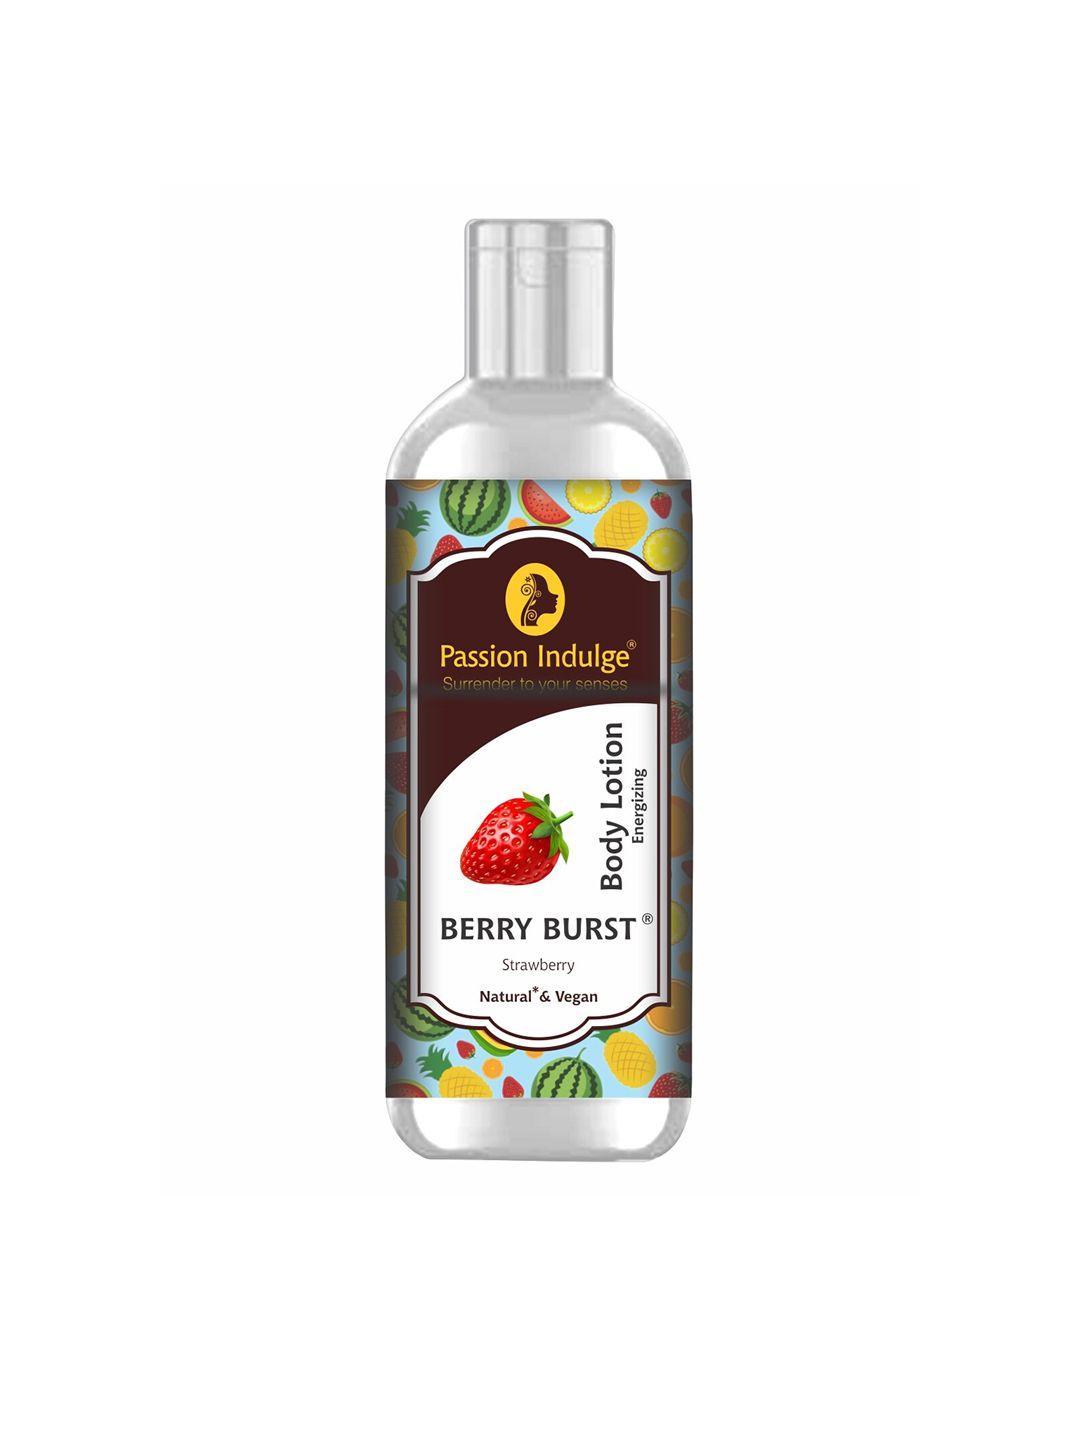 passion indulge pack of 2 body lotion berry burst - 200 ml each